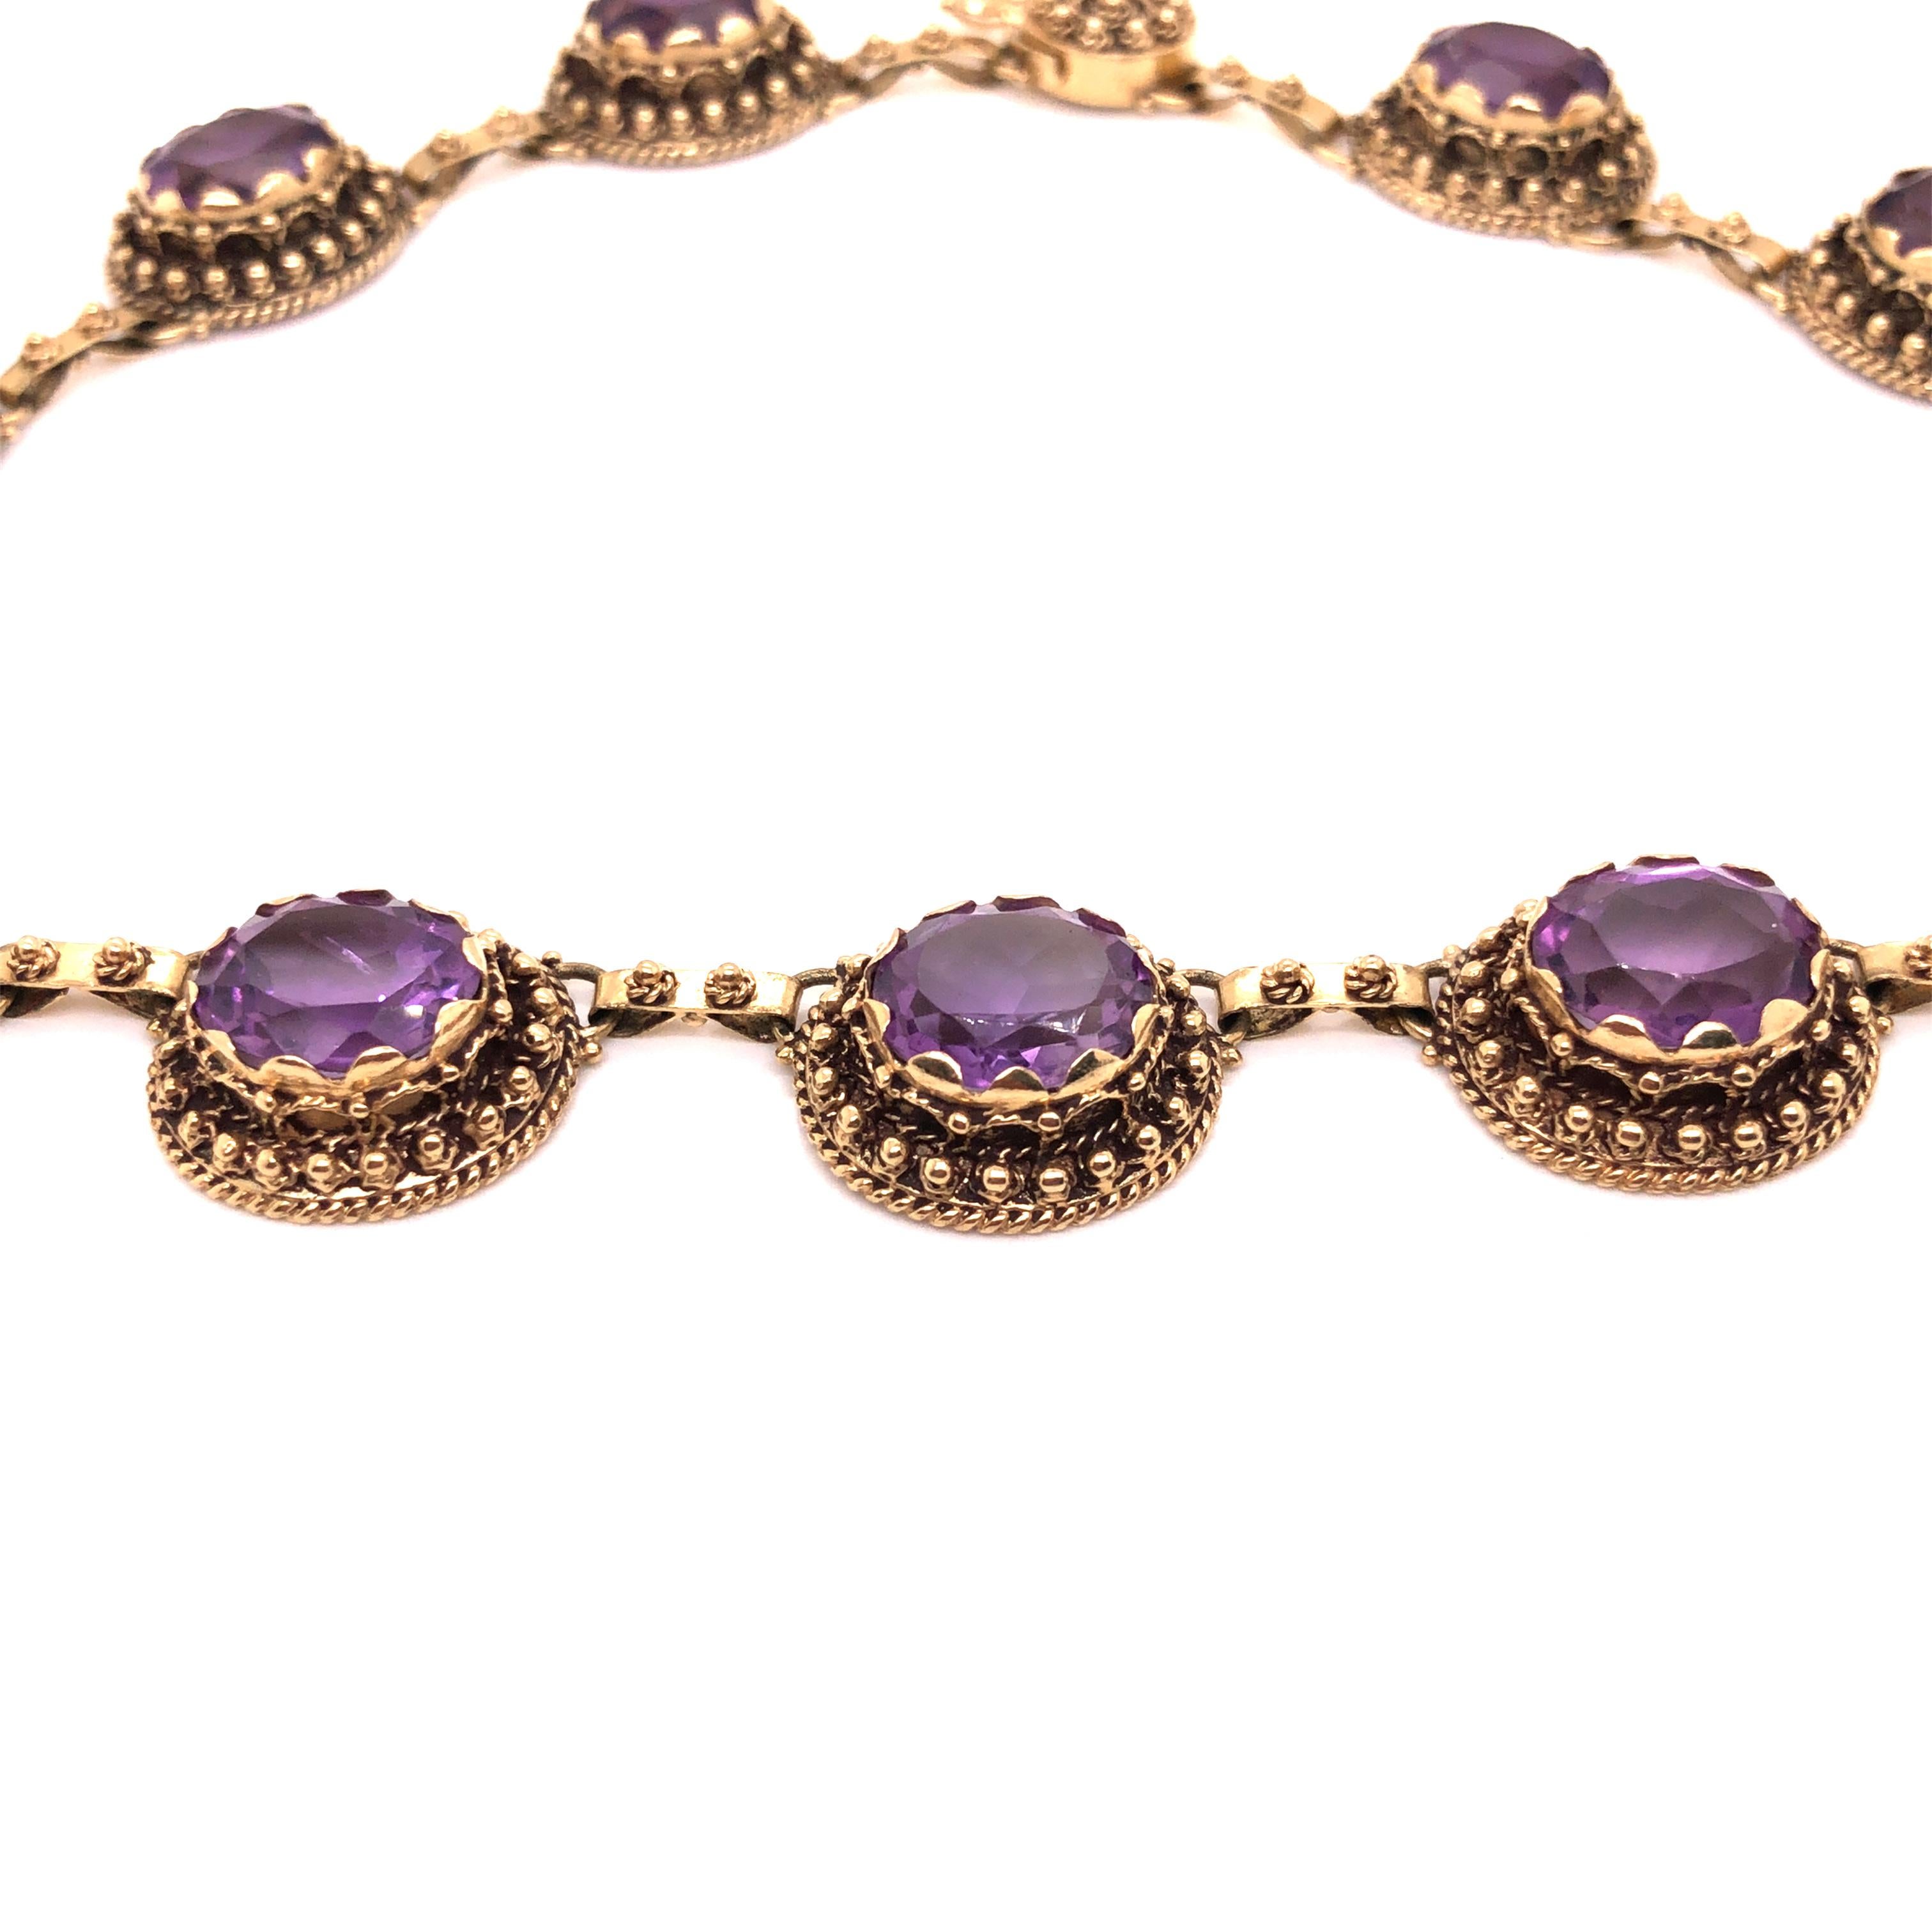 A vintage 14K yellow gold necklace consisting of 12 oval-cut amethyst measuring approximately 10mm x 12mm each.

Stone: Amethyst

Metal: 14K Yellow Gold

Size: 14.5